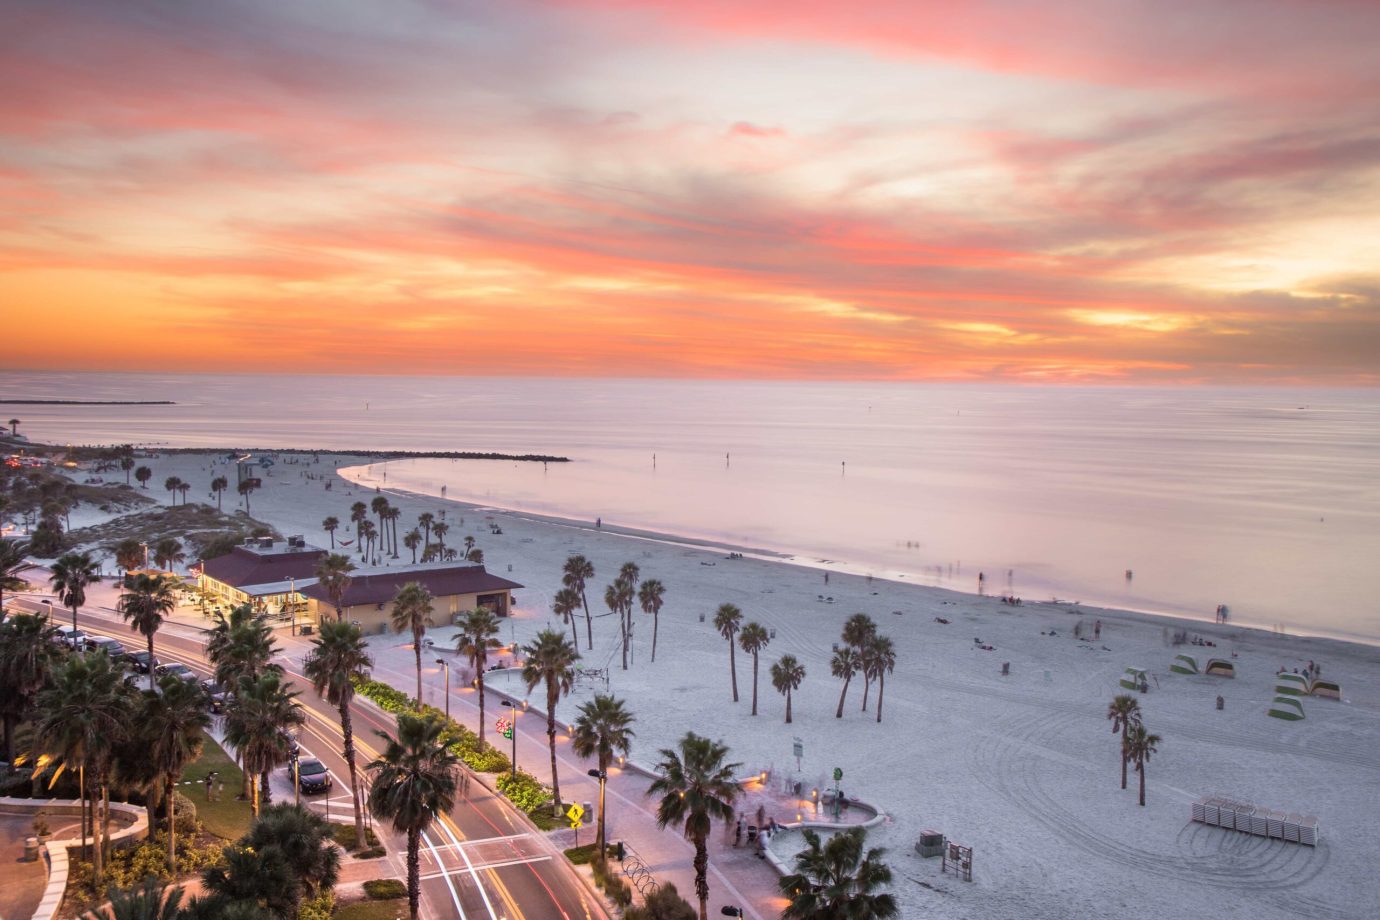 Sunset over Clearwater Beach in Florida